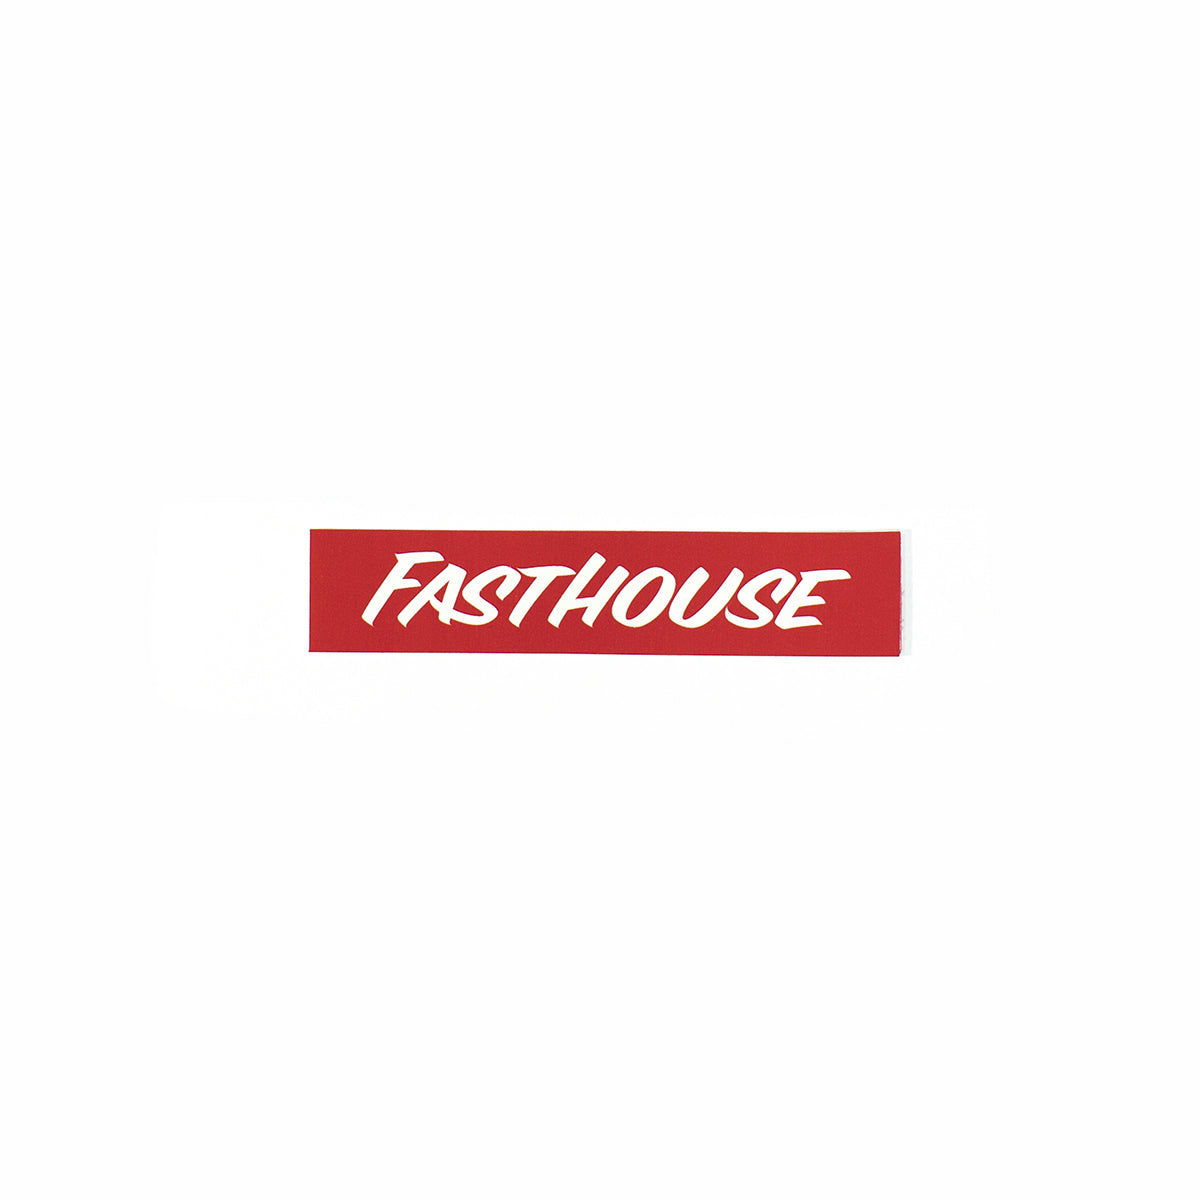 Fasthouse - Red Logo Sticker